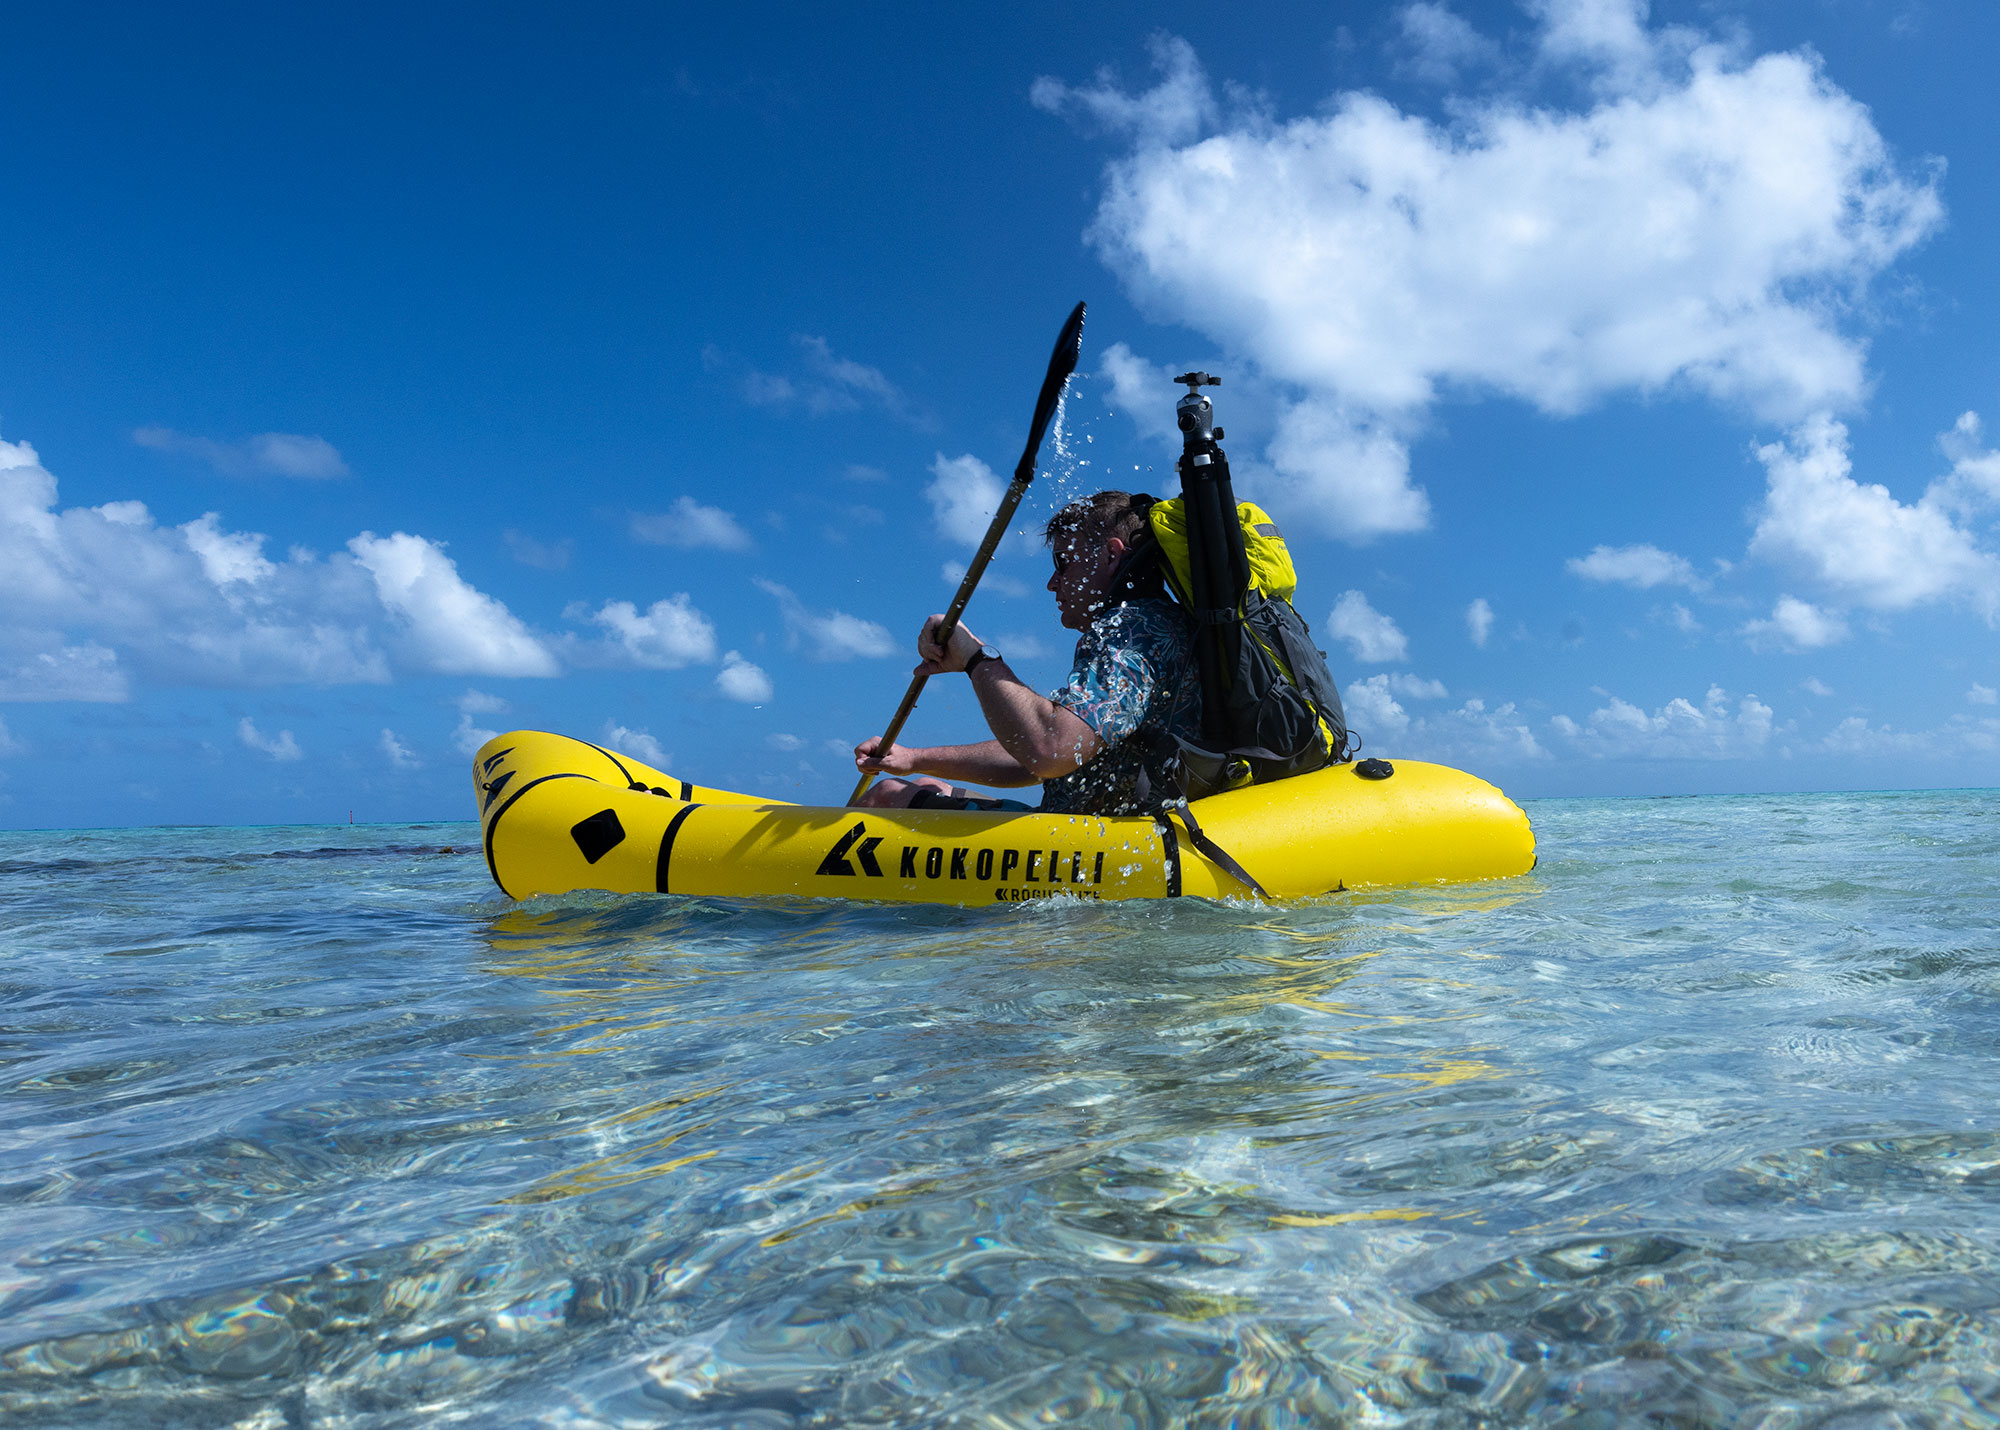 Photographing from a Packraft